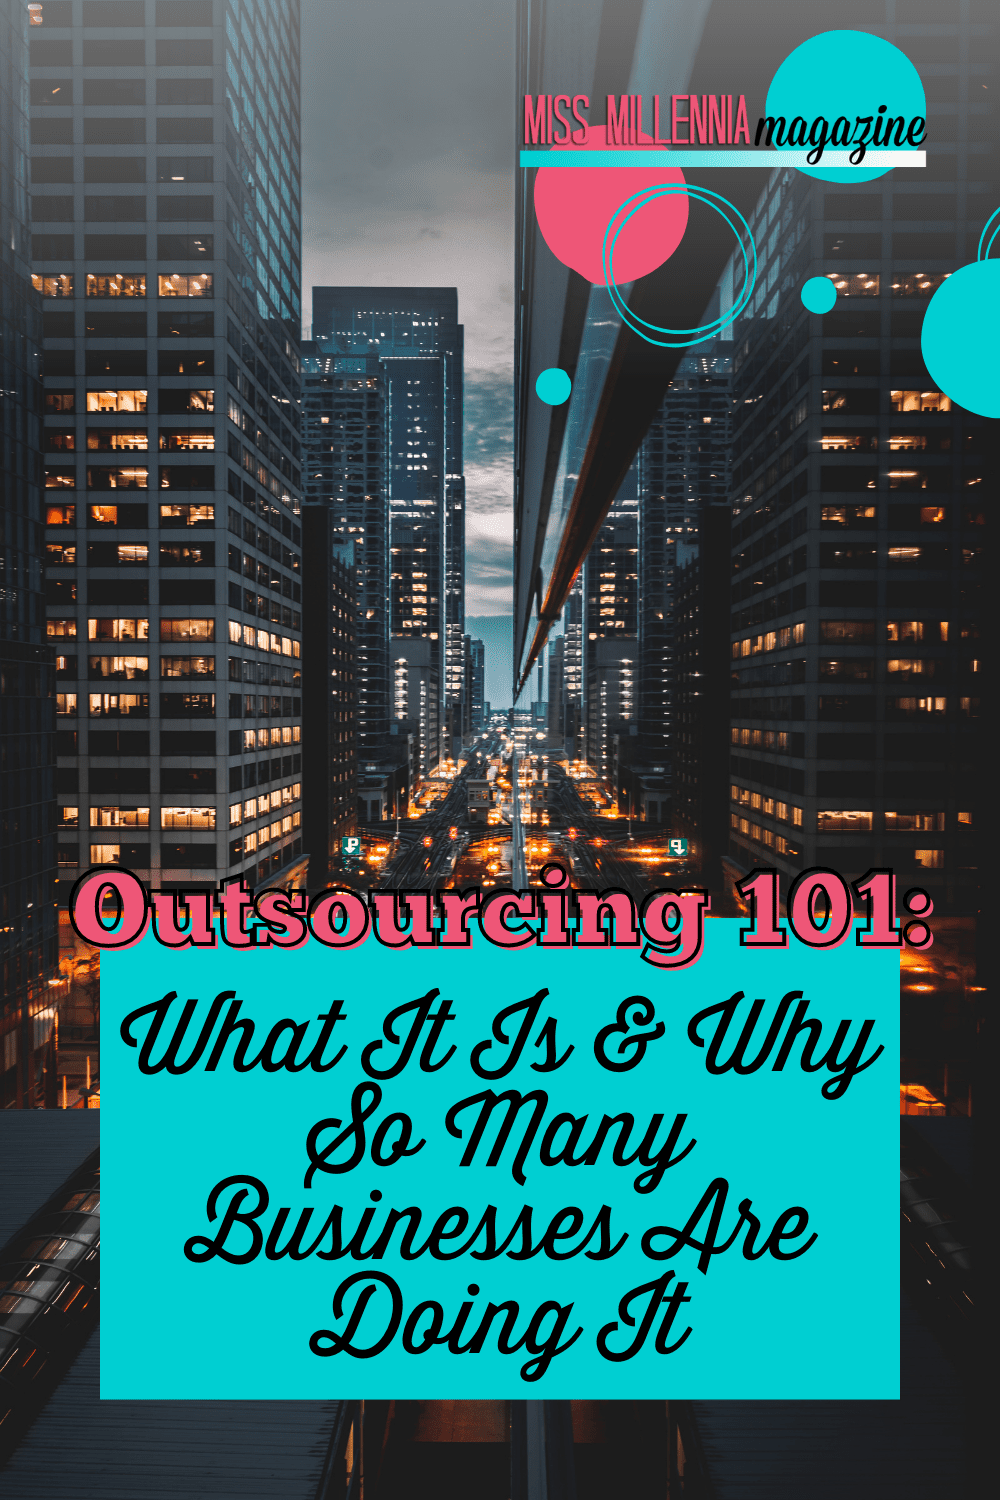 Outsourcing 101: What It Is & Why So Many Businesses Are Doing It